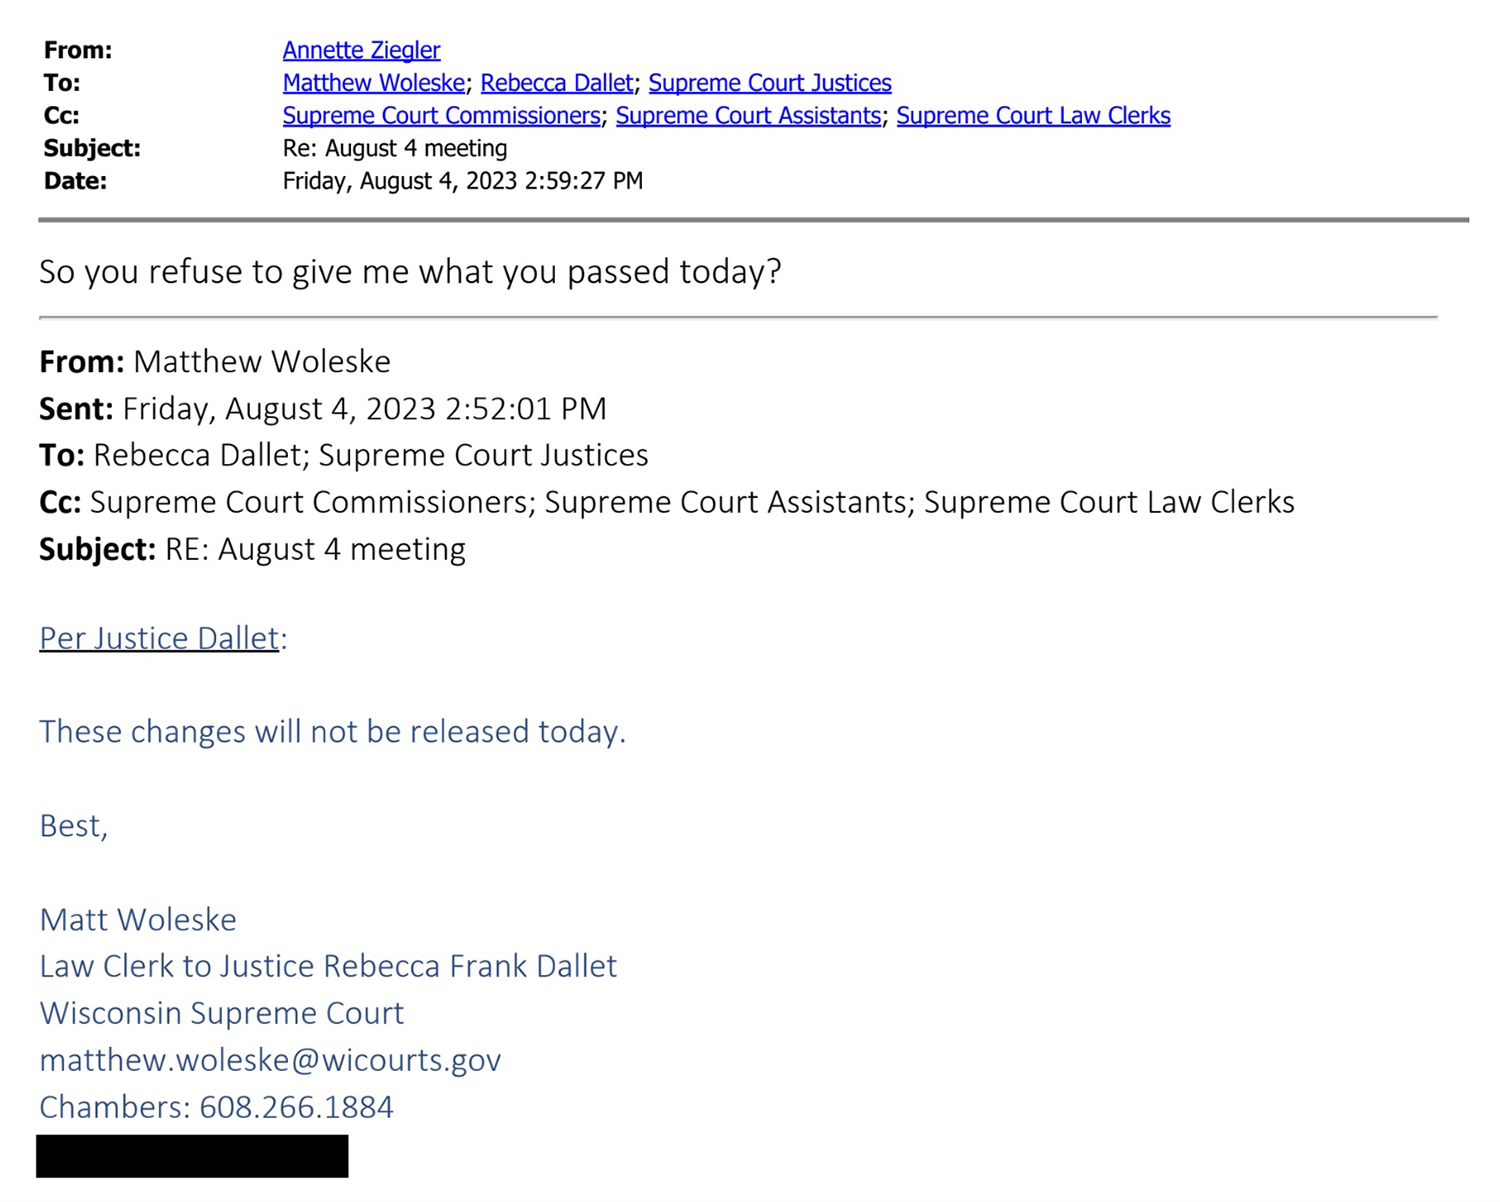 A screenshot shows an email sent by Annette Ziegler to Matthew Woleske, Rebecca Dallet and "Supreme Court Justices" with "Supreme Court Commissioners," "Supreme Court Assistants" and "Supreme Court Law Clerks" cc'd sent on August 4, 2023.